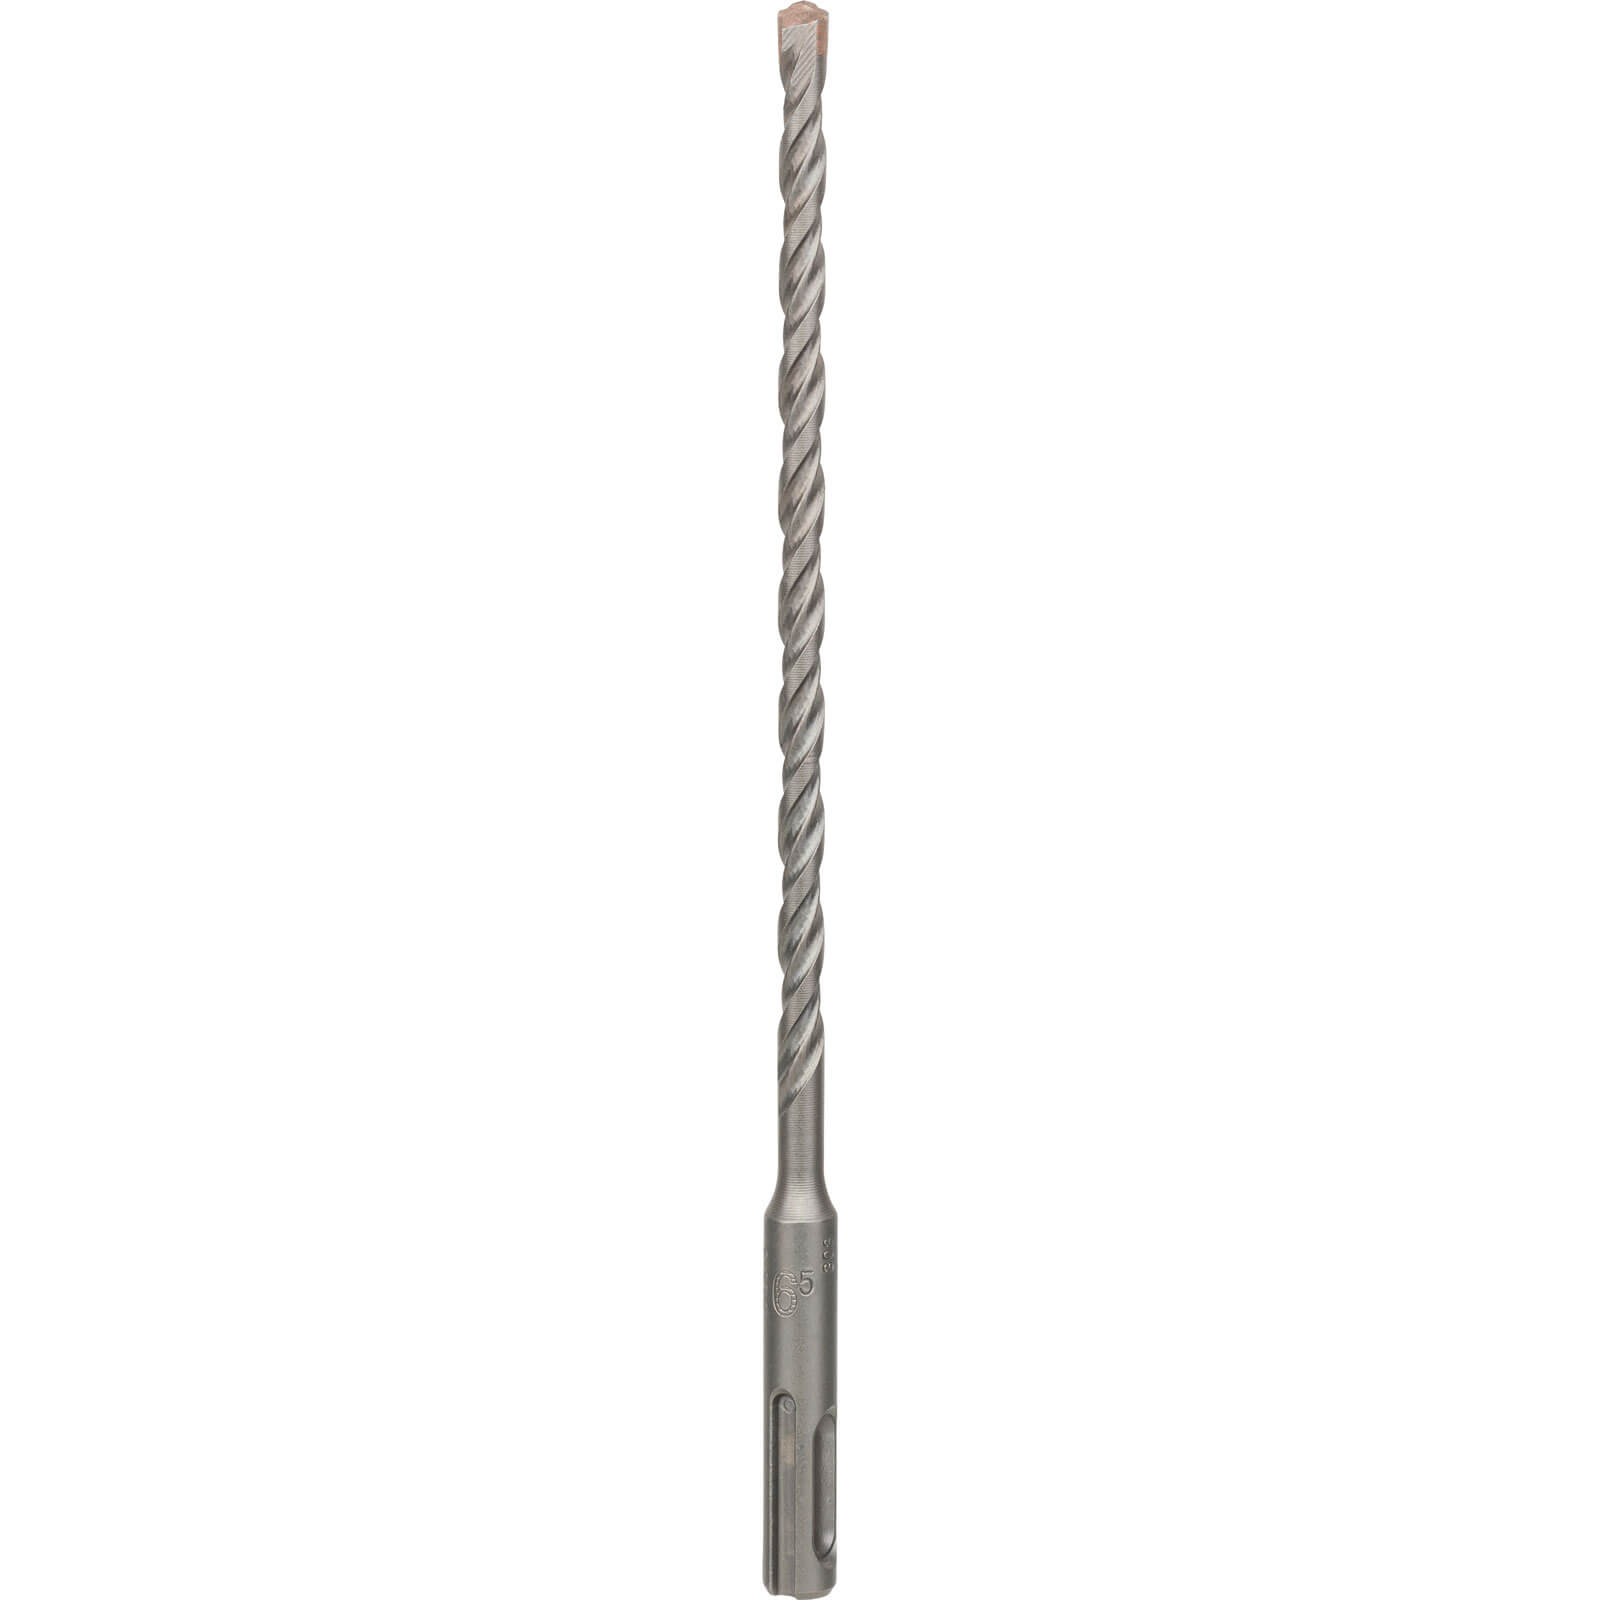 Image of Bosch Series 3 SDS Plus Masonry Drill Bit 6.5mm 210mm Pack of 1